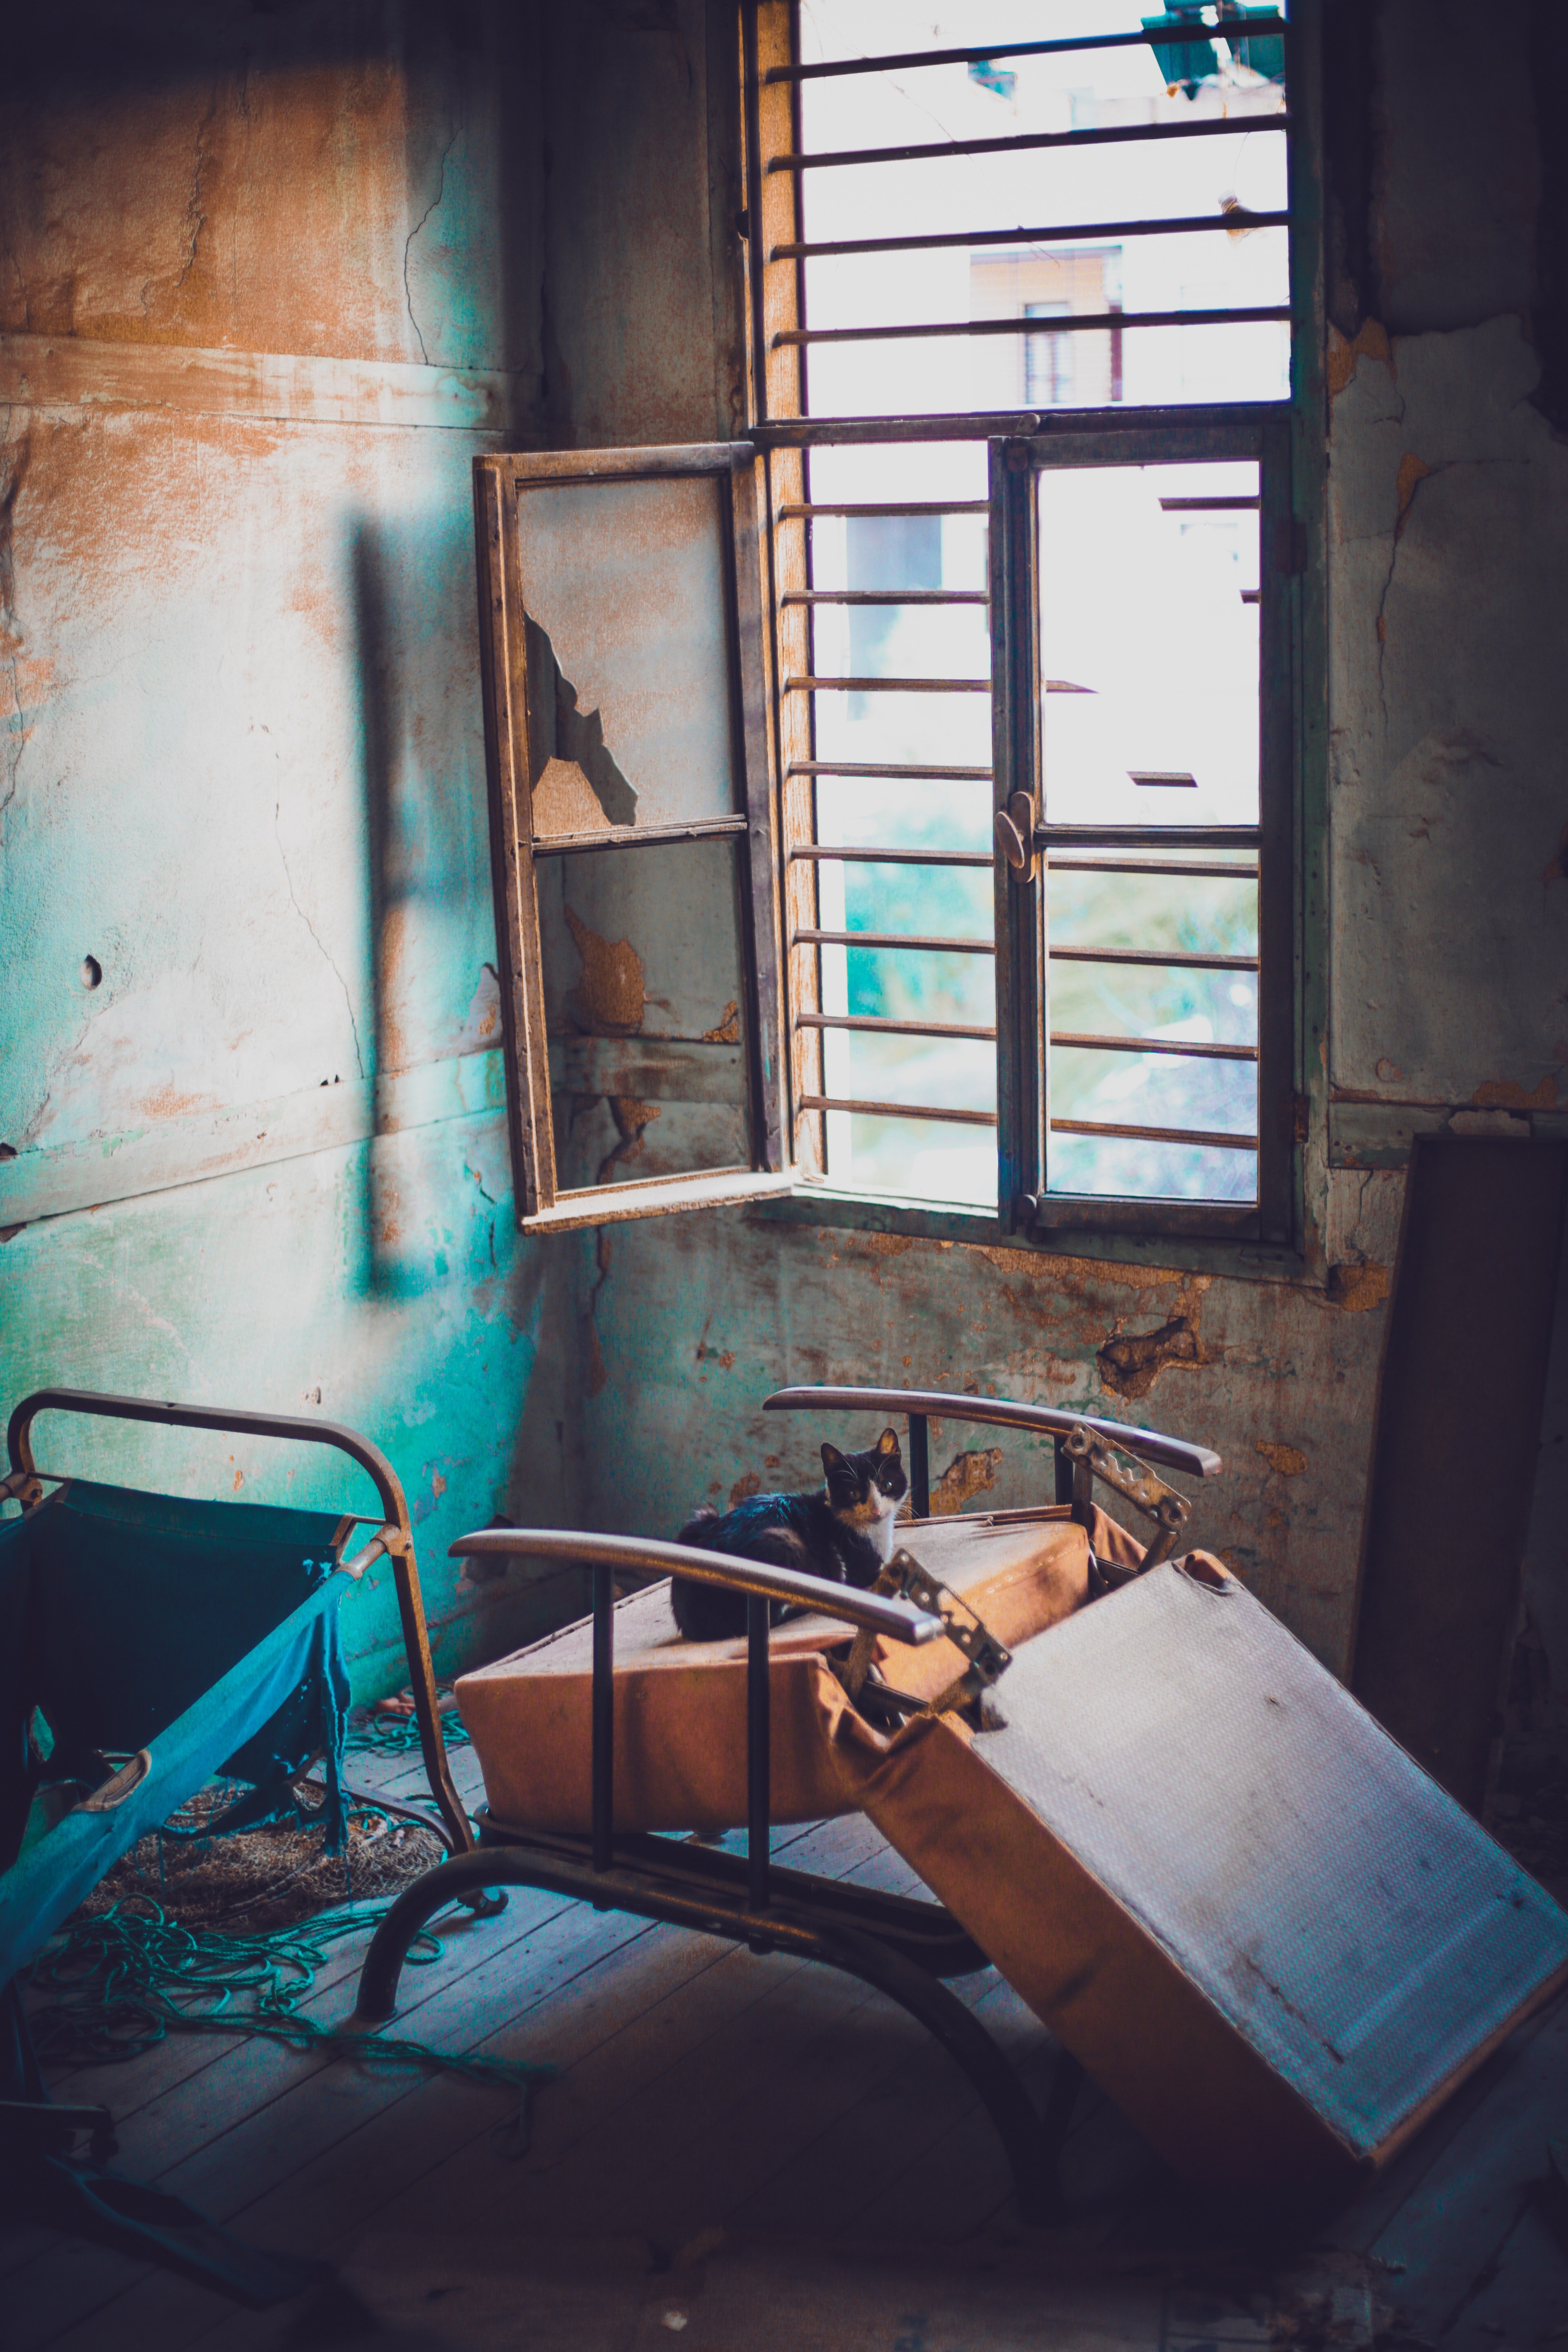 The house was in a terrible condition. | Source: Pexels